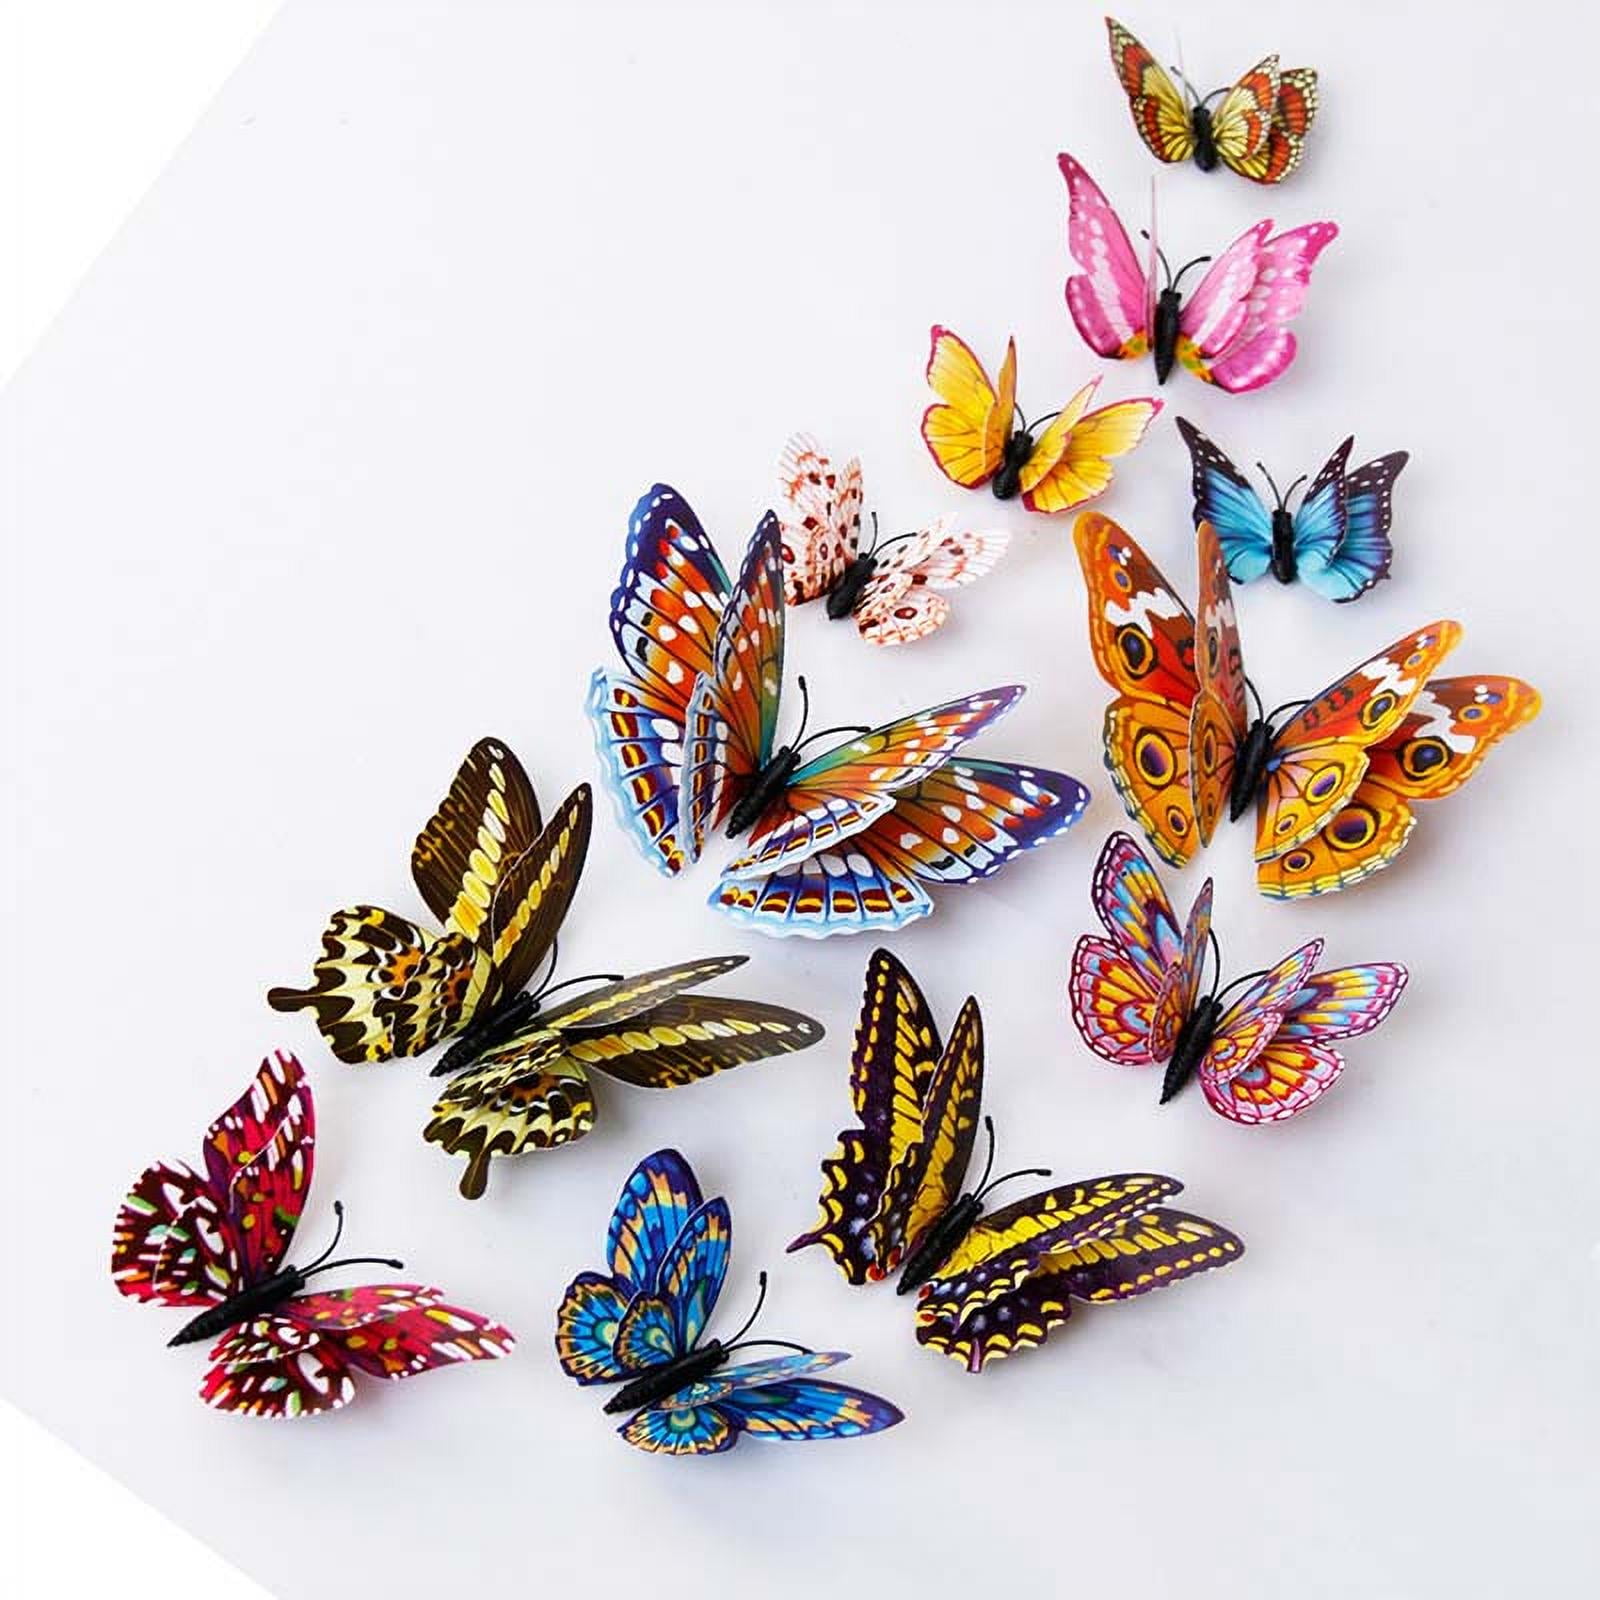 Yirtree 12PCS Vibrant Double Wings 3D Butterfly Wall Stickers